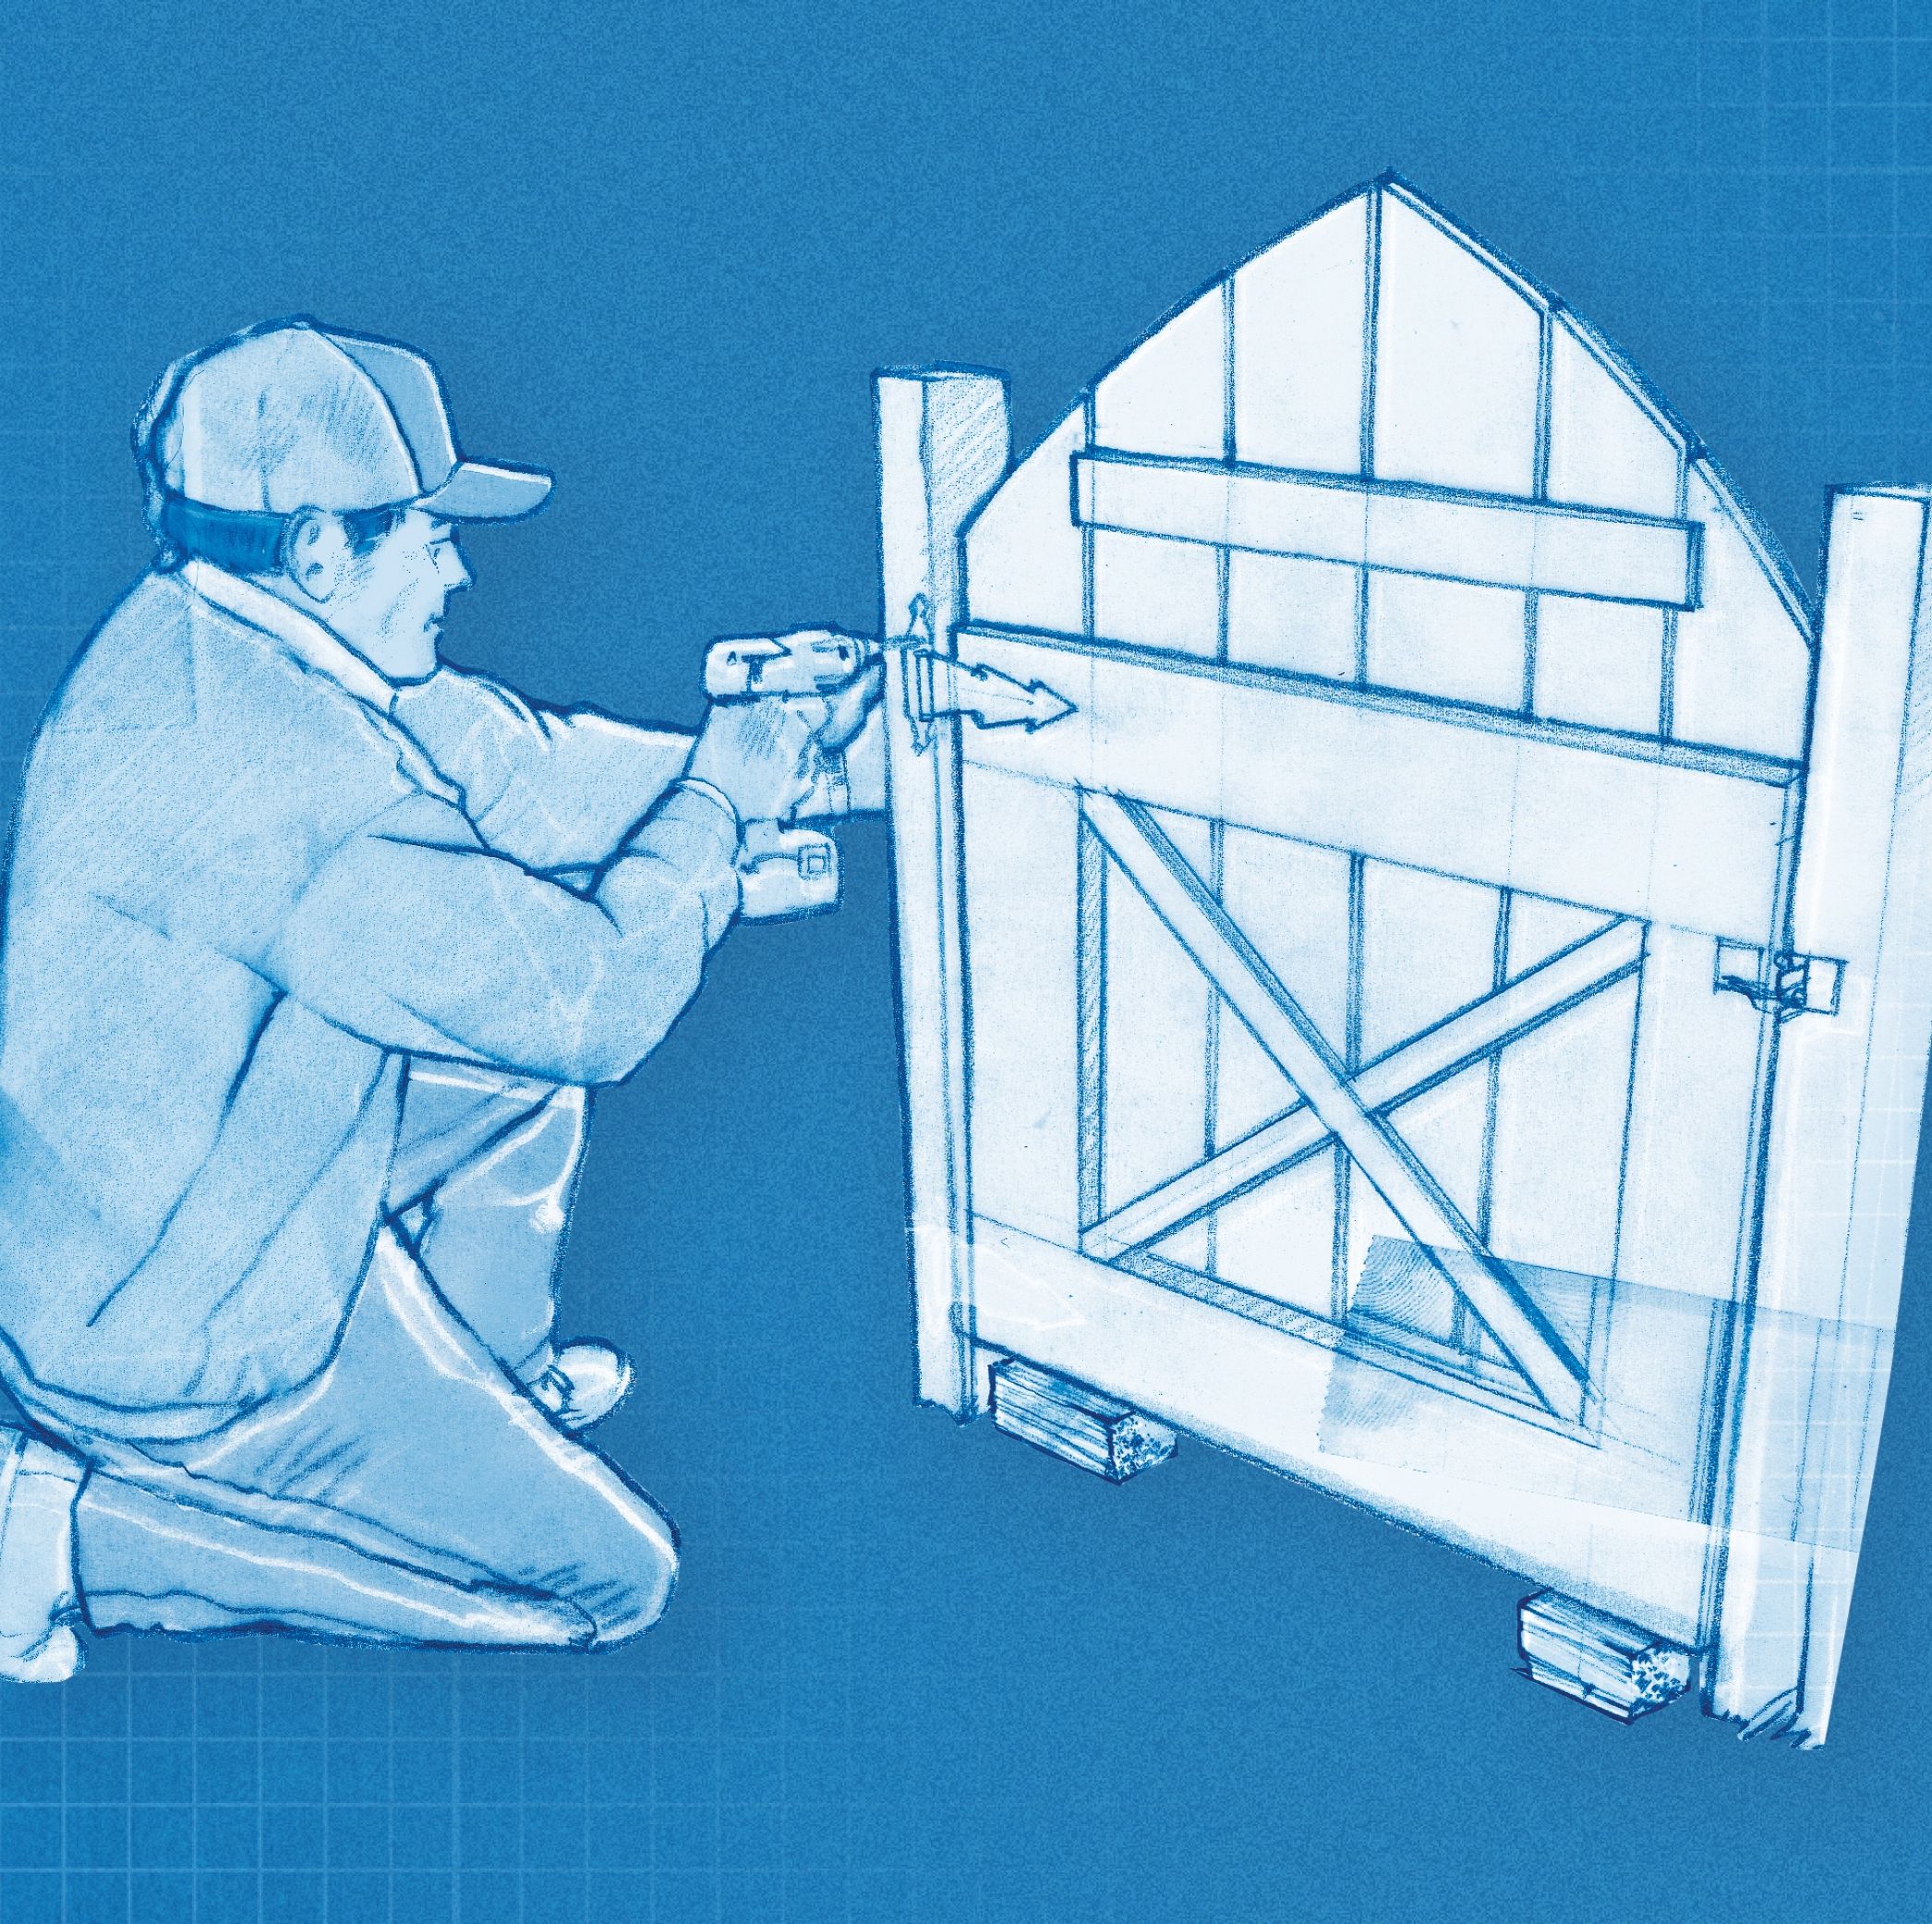 How To Build a Picket Fence